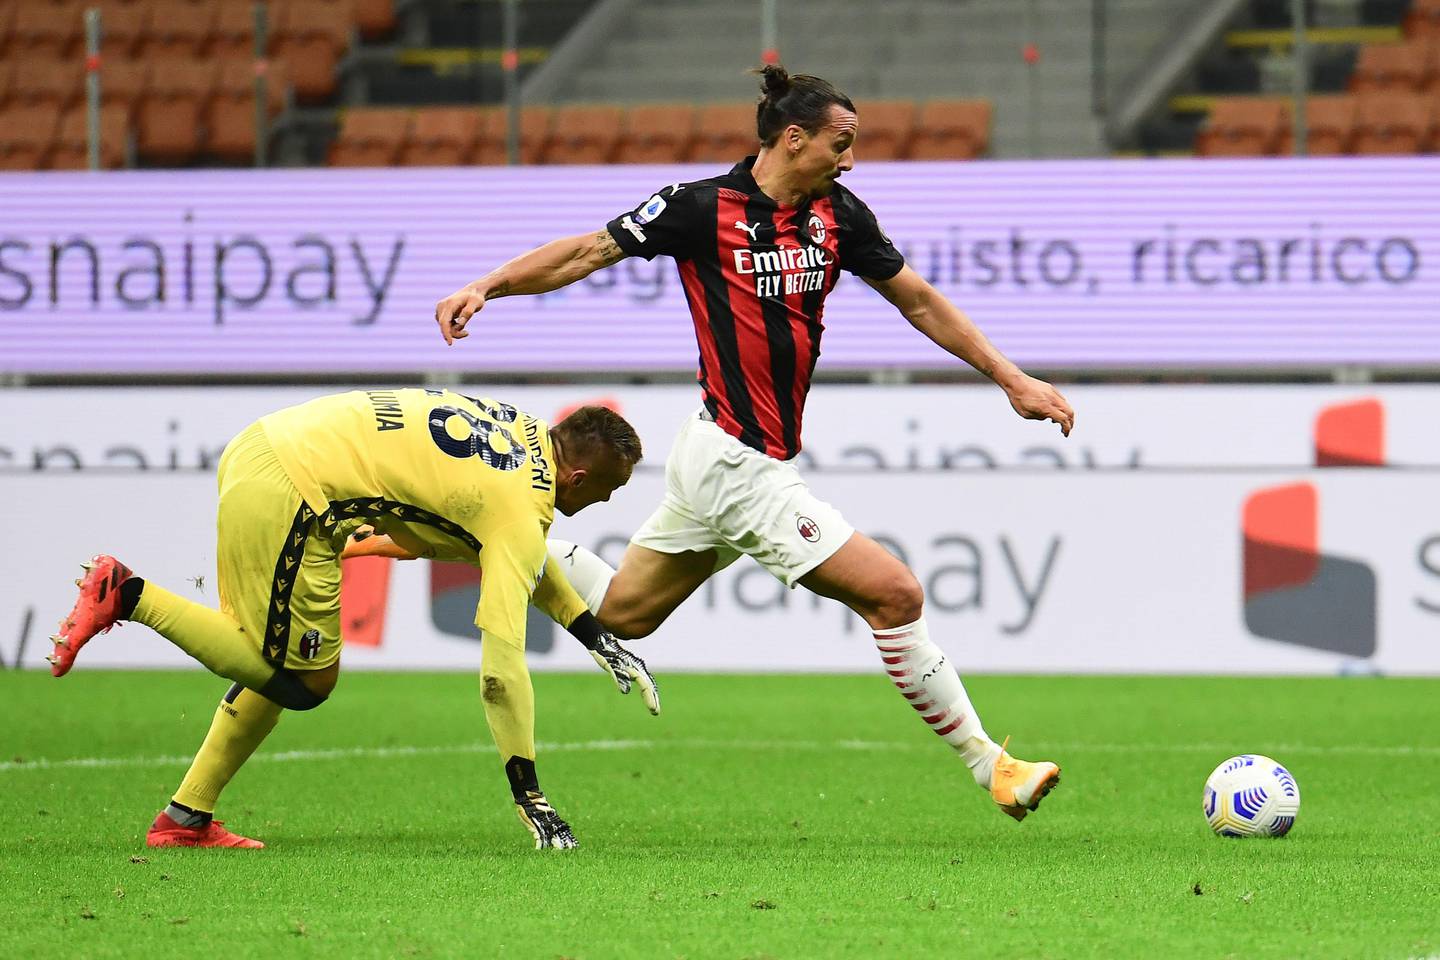 AC Milan's Swedish forward Zlatan Ibrahimovic (R) fights for the ball with Bologna's Polish goalkeeper Lukasz Skorupski during the Italian Serie A football match AC Milan vs Bologne at the San Siro stadium in Milan on September 21, 2020. (Photo by MIGUEL MEDINA / AFP)